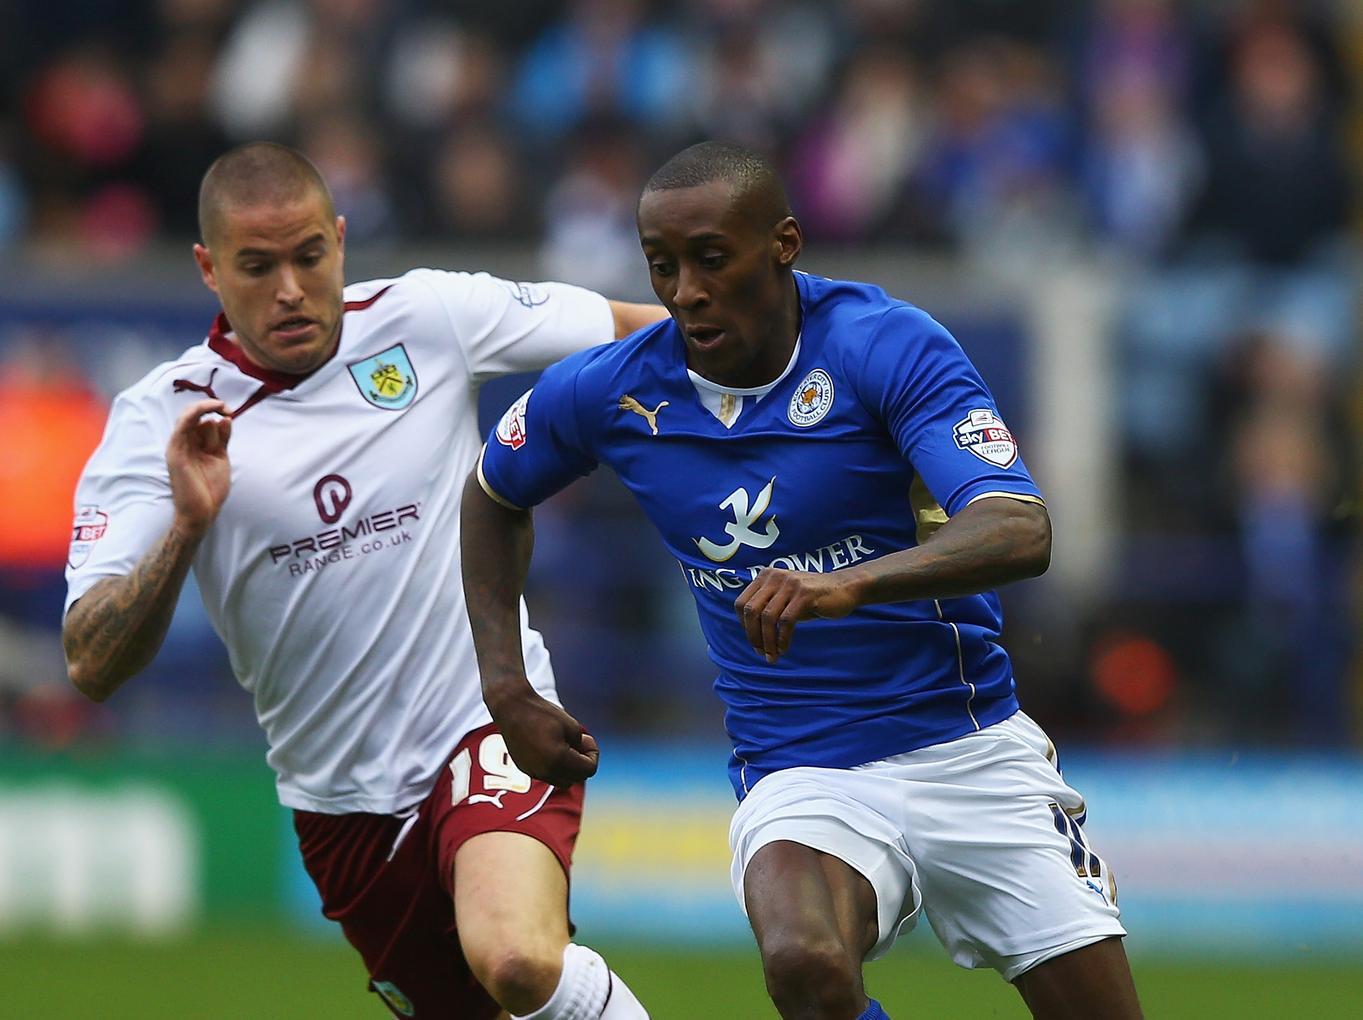 The former Leicester City and Watford speed merchant made just three appearances as a substitute as Sean Dyche's side won the Championship title. He featured for just over an hour in total.